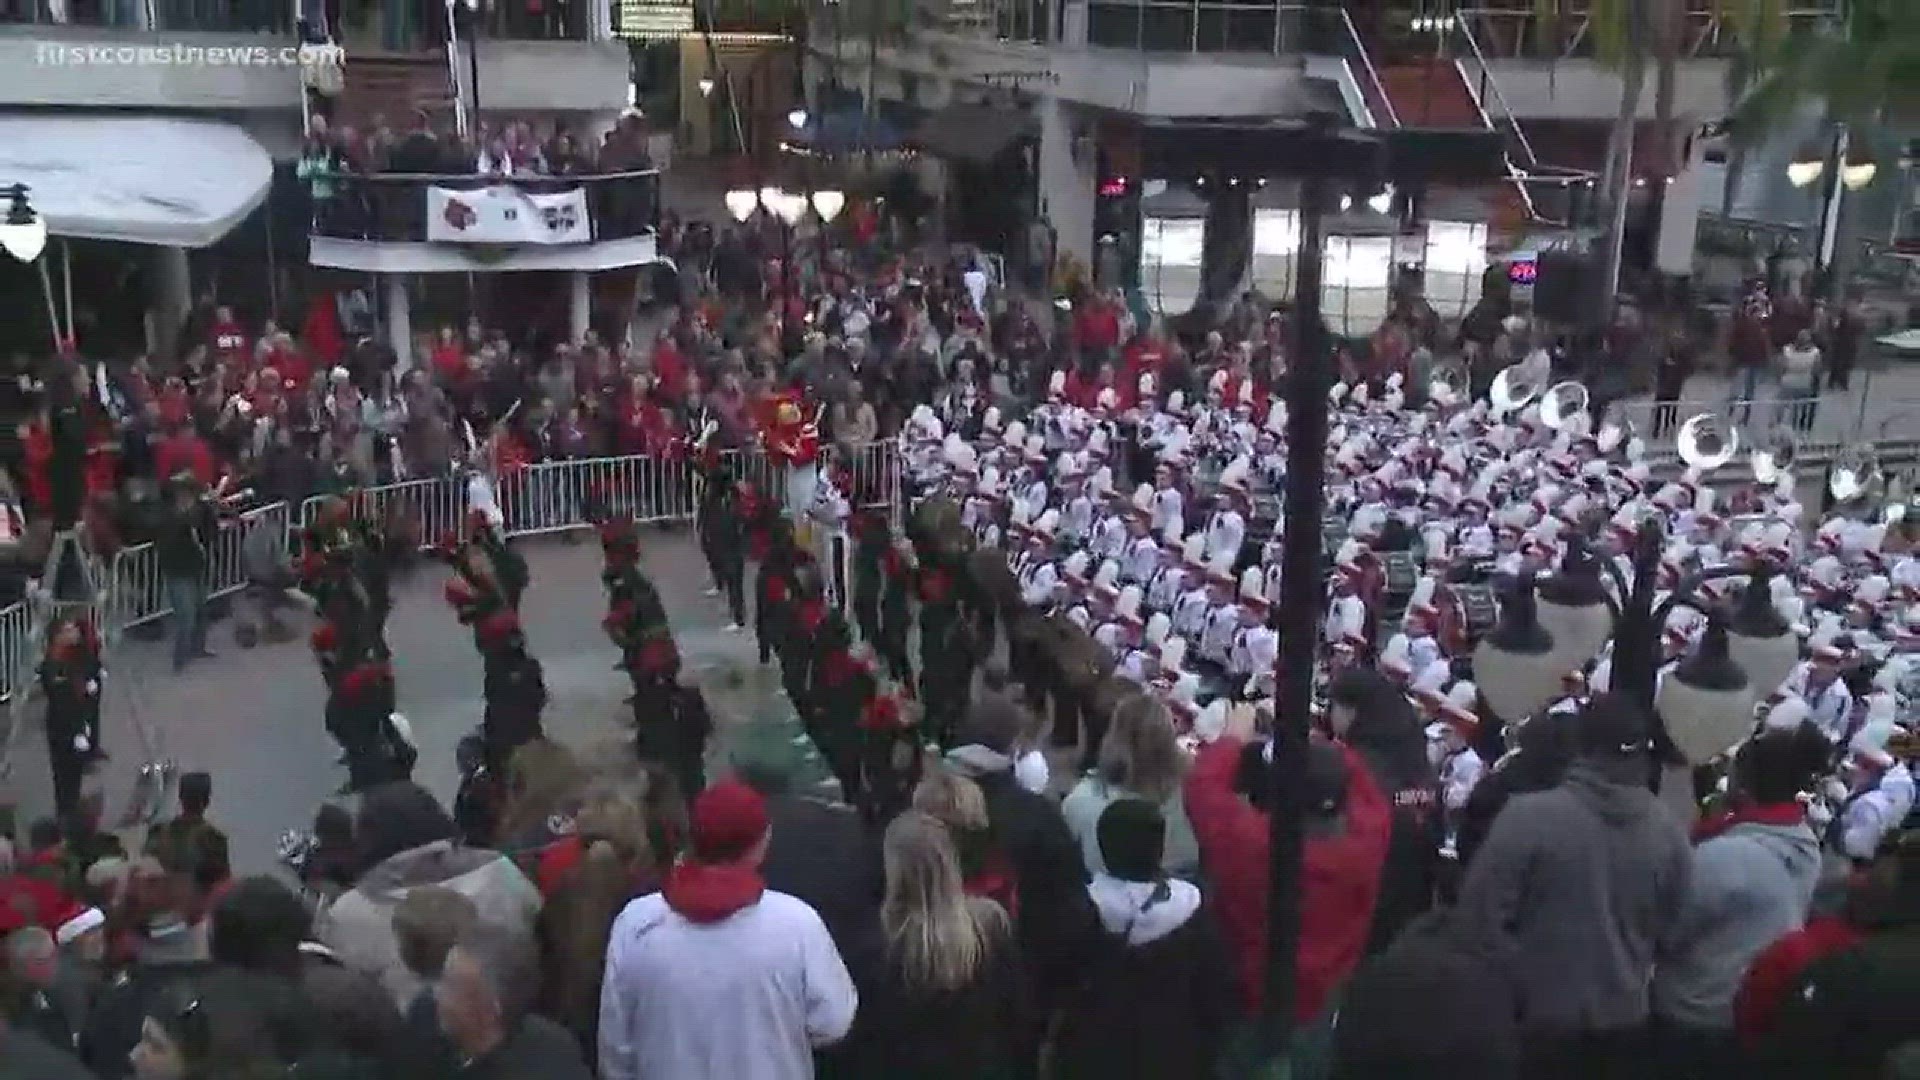 FCN's Janny Rodriguez gives you a look at the festivities taking place at the Jacksonville Landing to kickoff the Taxslayer Bowl this weekend.